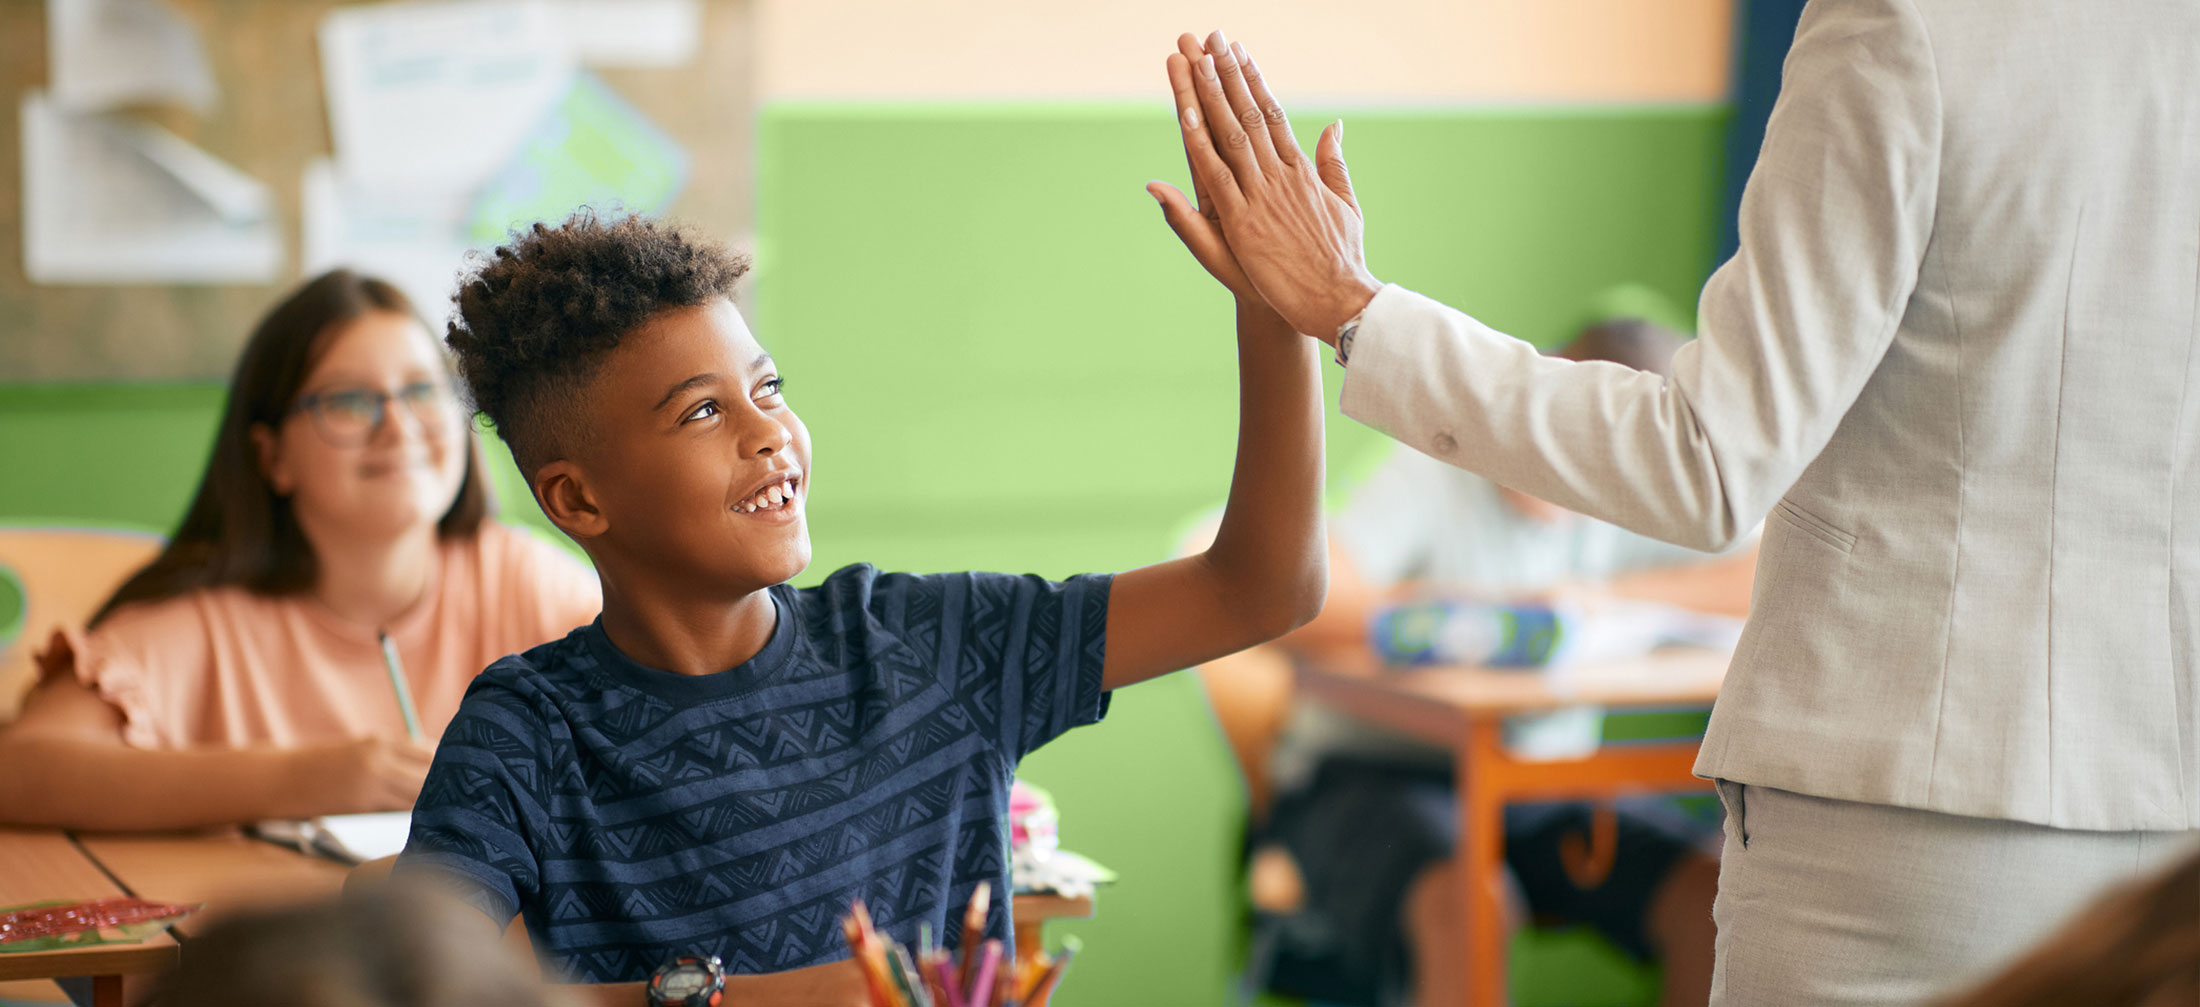 Middle School age student high-fiving their teacher.